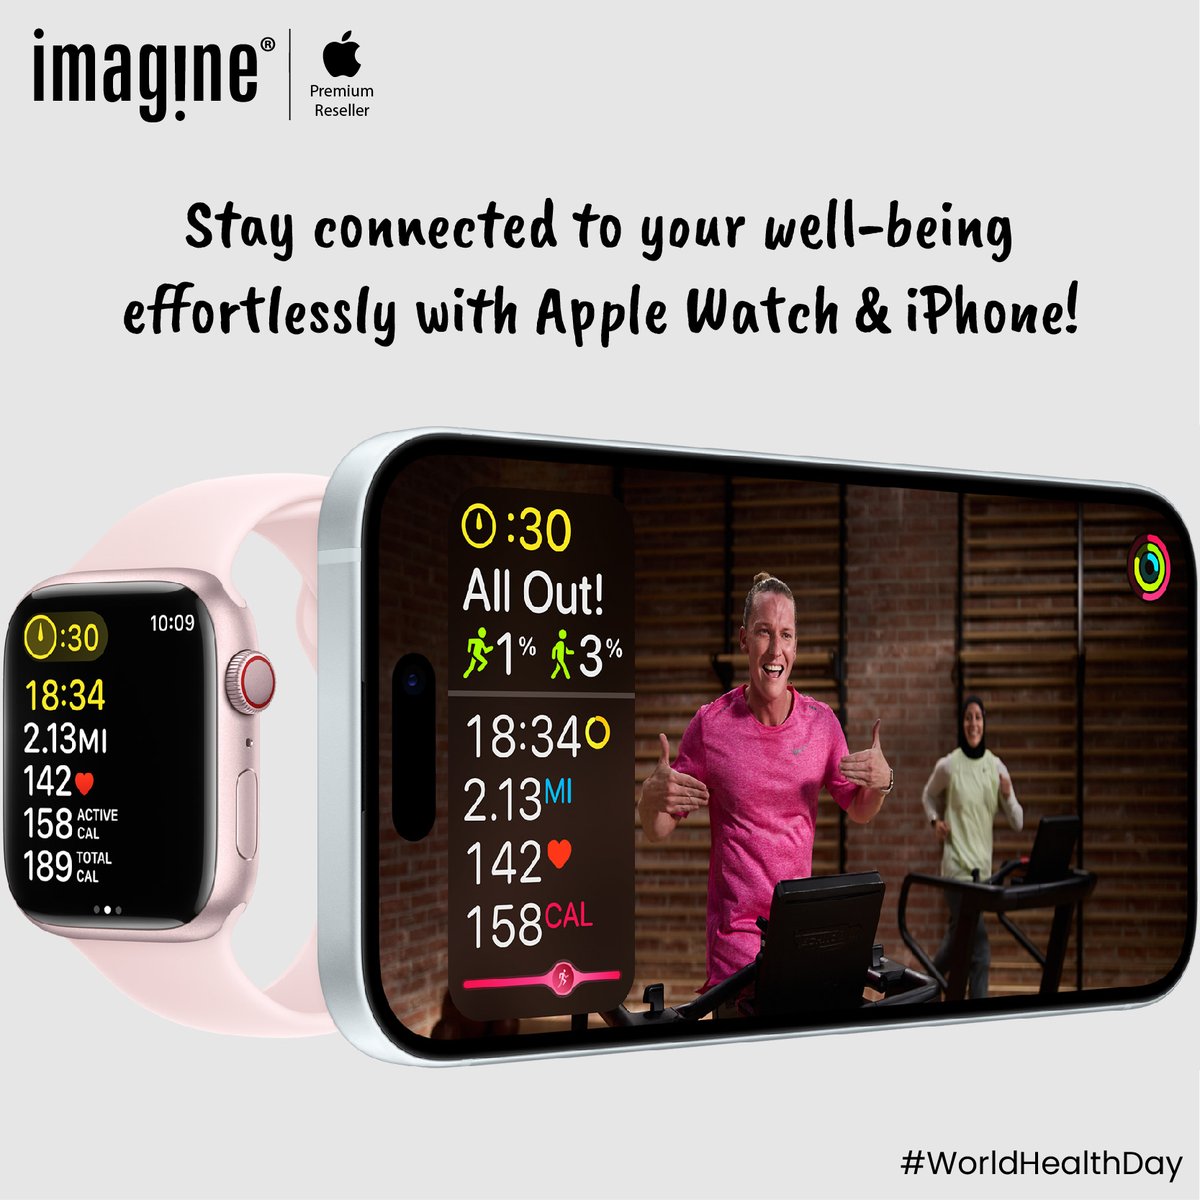 Easily prioritize your well-being with Apple Watch & iPhone. Track fitness, monitor vitals, and stay motivated seamlessly. Celebrate World Health Day with @ImagineApplePR! #Apple #Tresor #Imagine #WorldHealthDay #iPhone #AppleWatch #Fitness #Dedication #Health